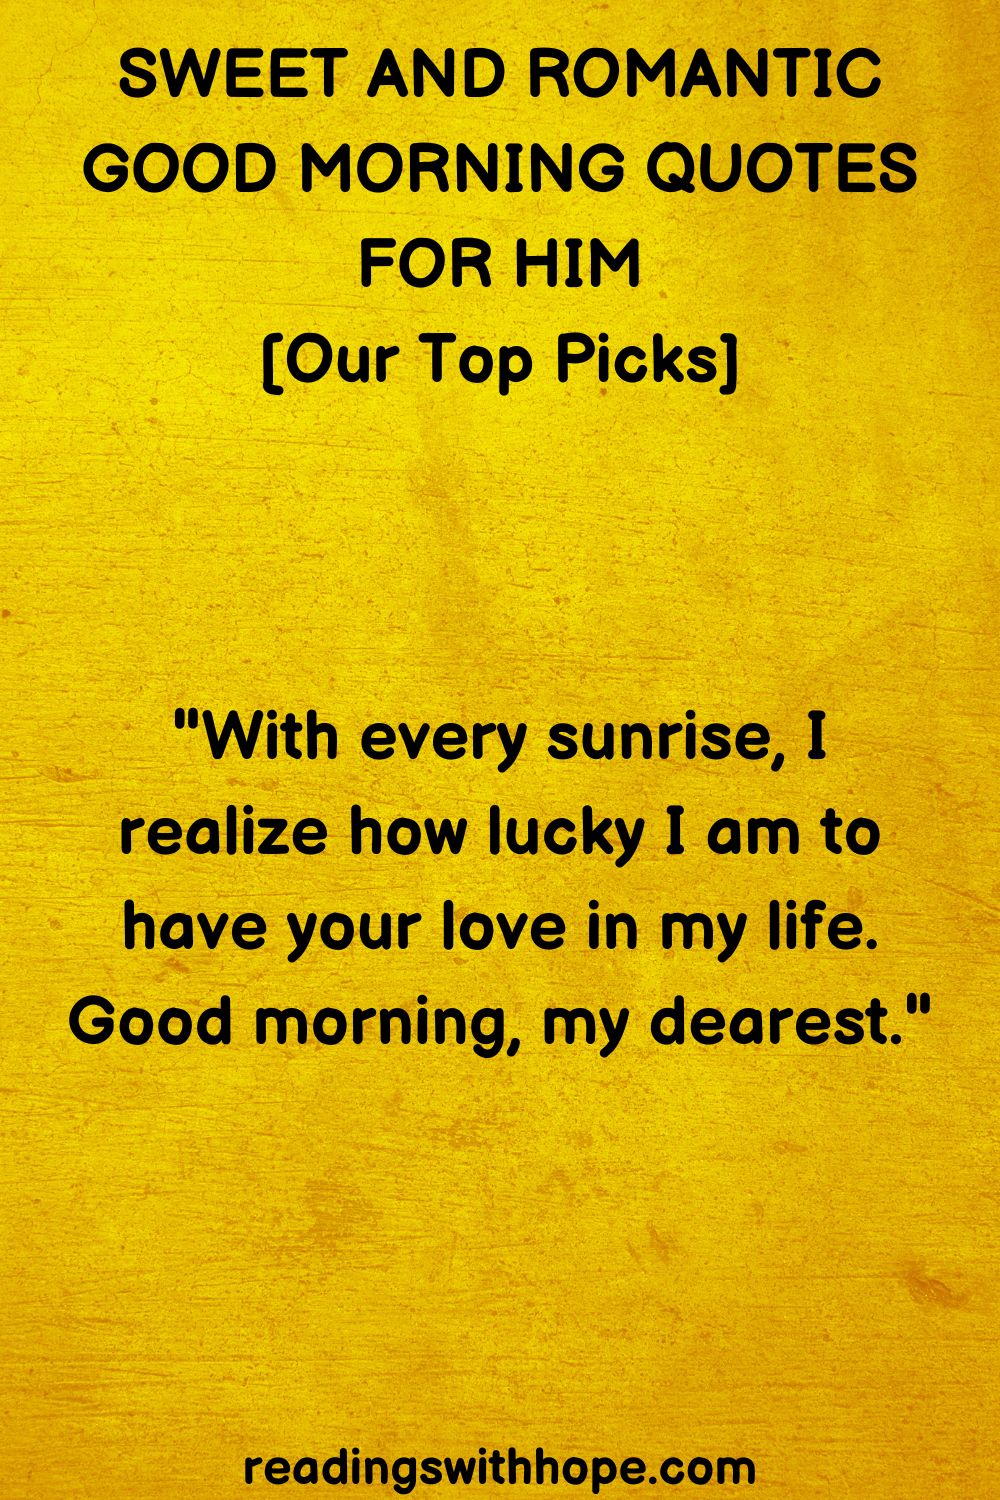 Sweet and Romantic Good Morning Quote for Him